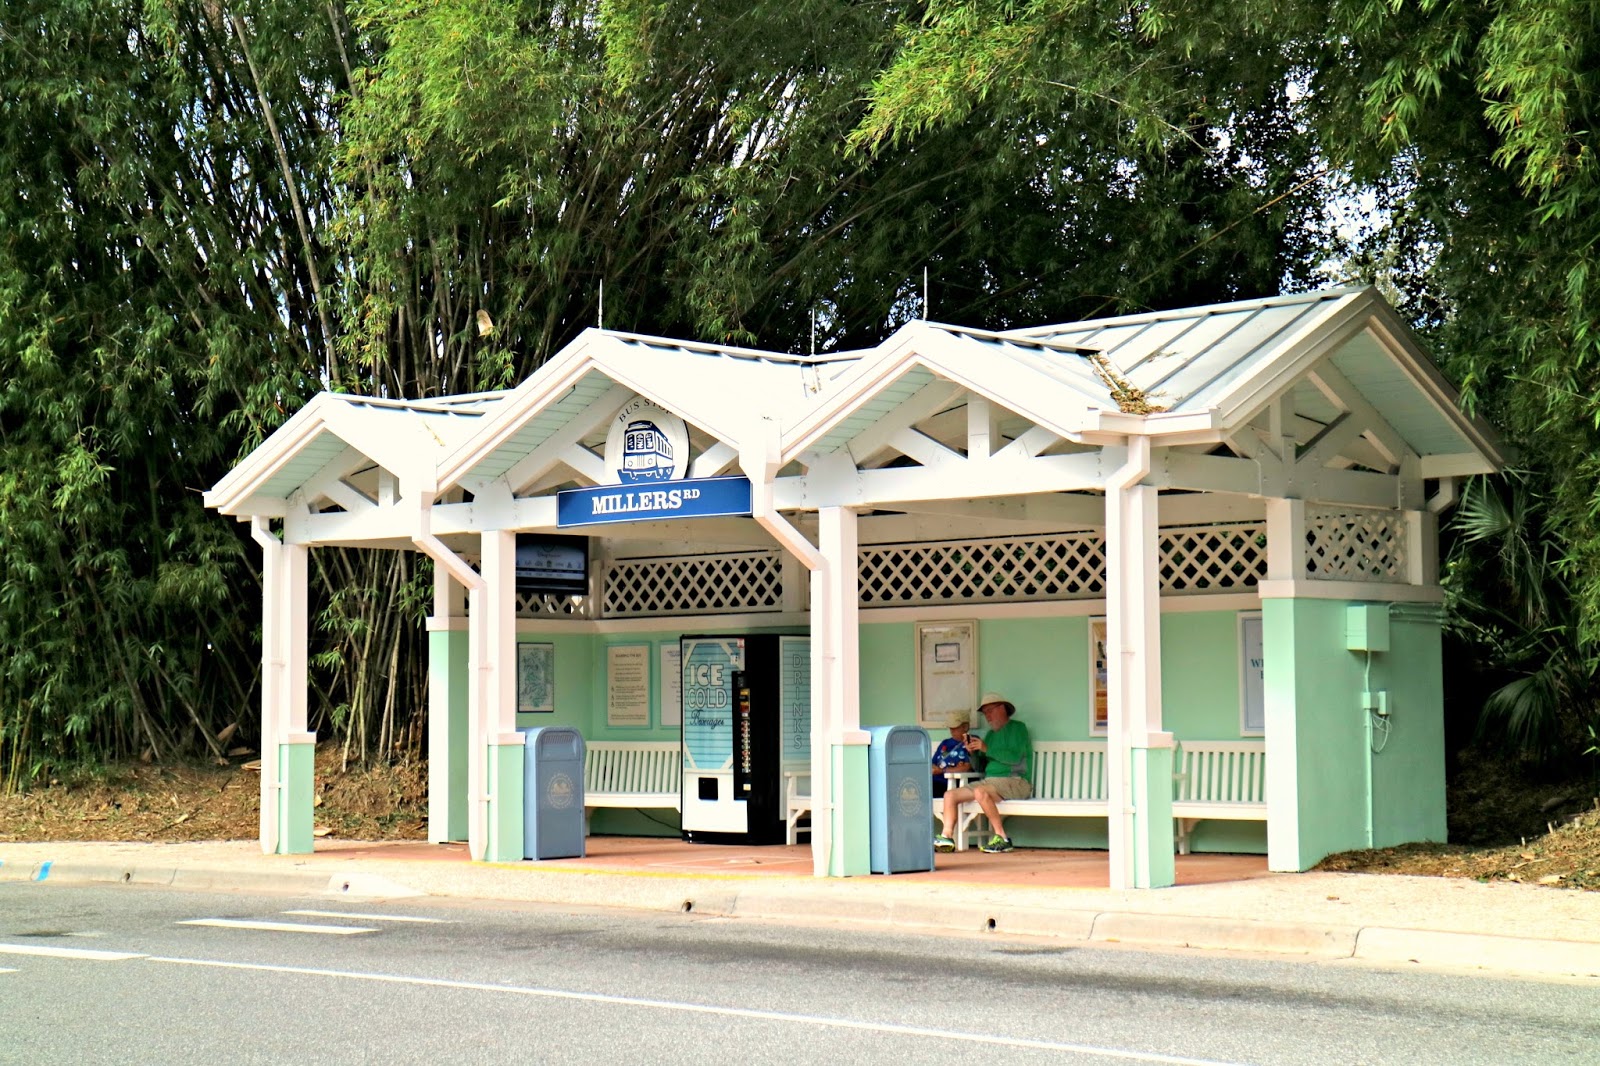 Bus Stop at Old Key West